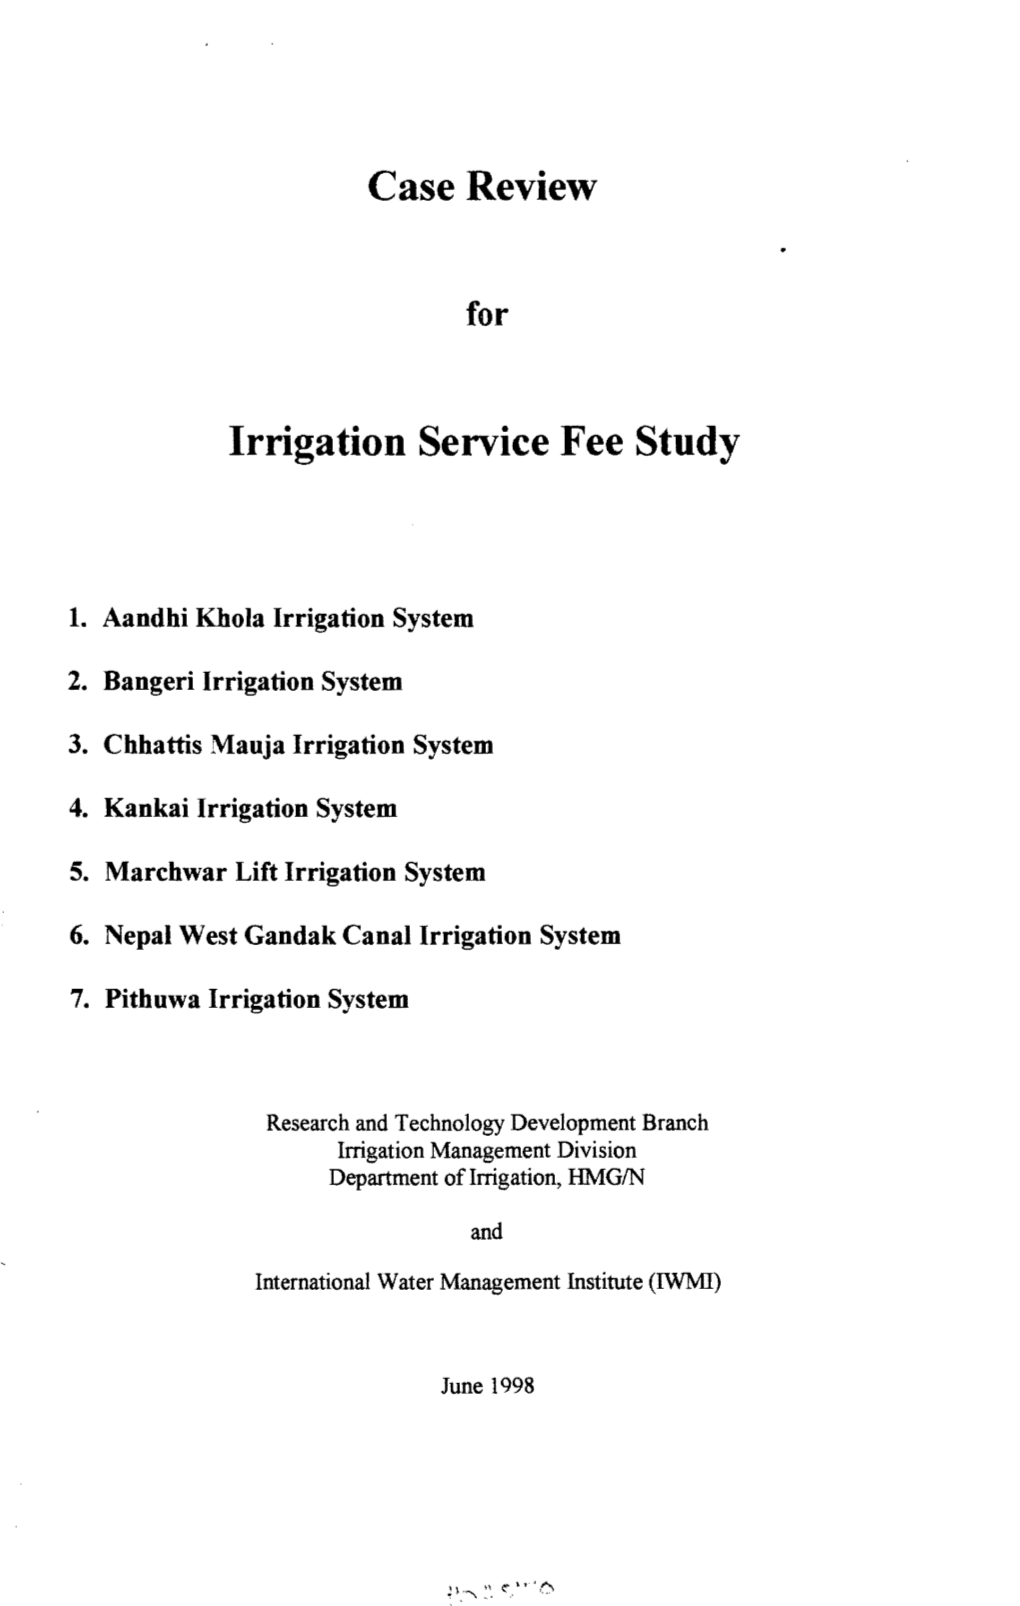 Case Review Irrigation Service Fee Study